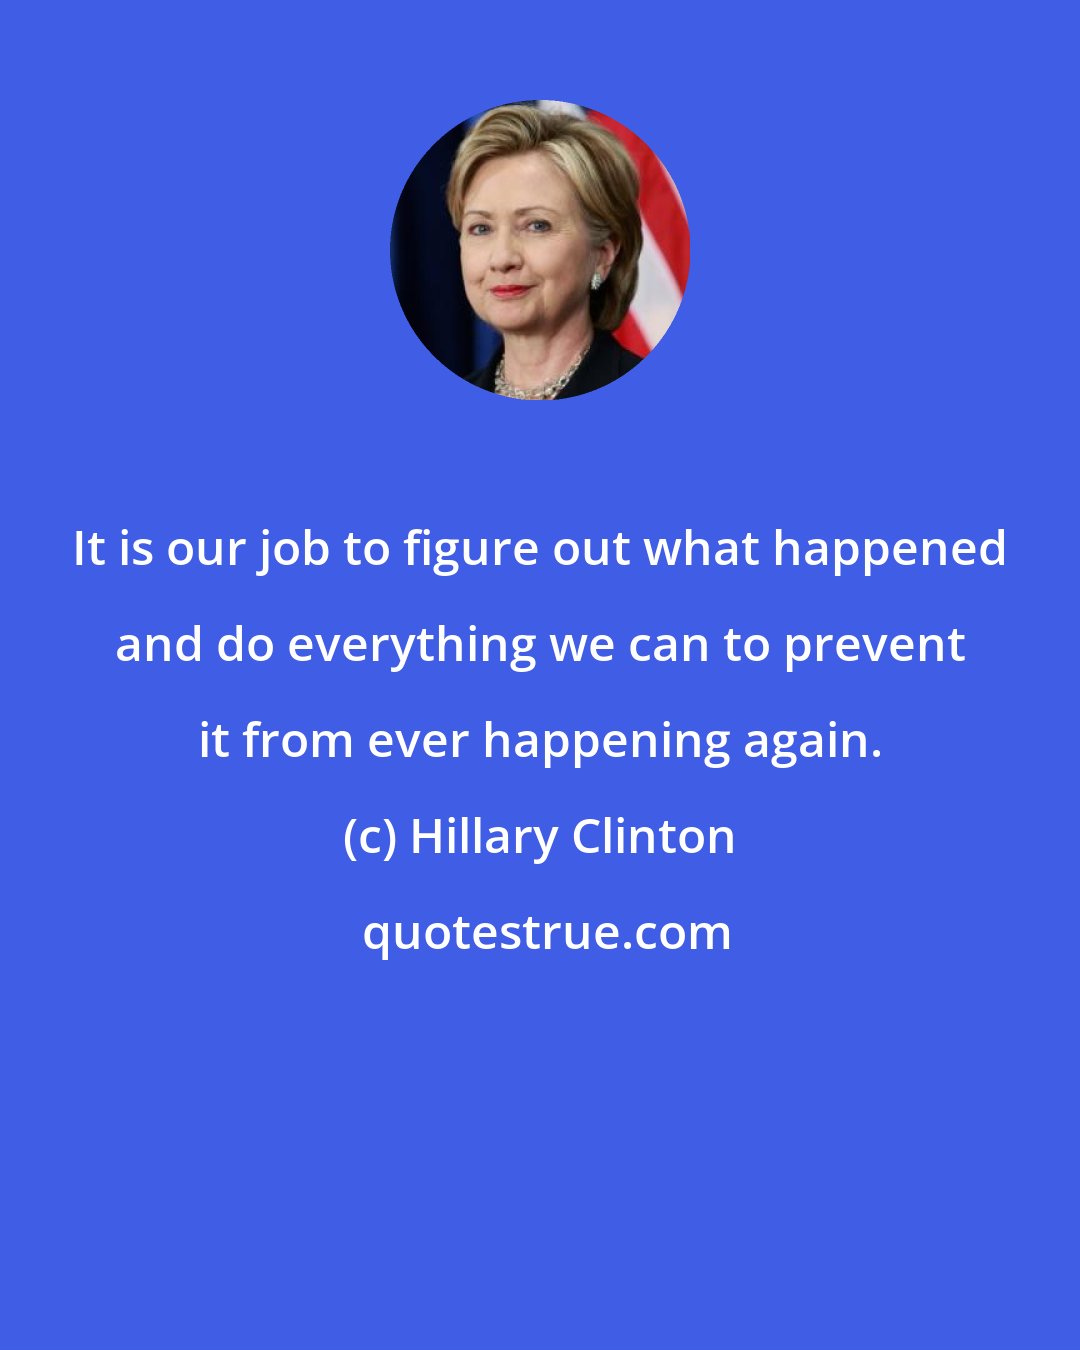 Hillary Clinton: It is our job to figure out what happened and do everything we can to prevent it from ever happening again.